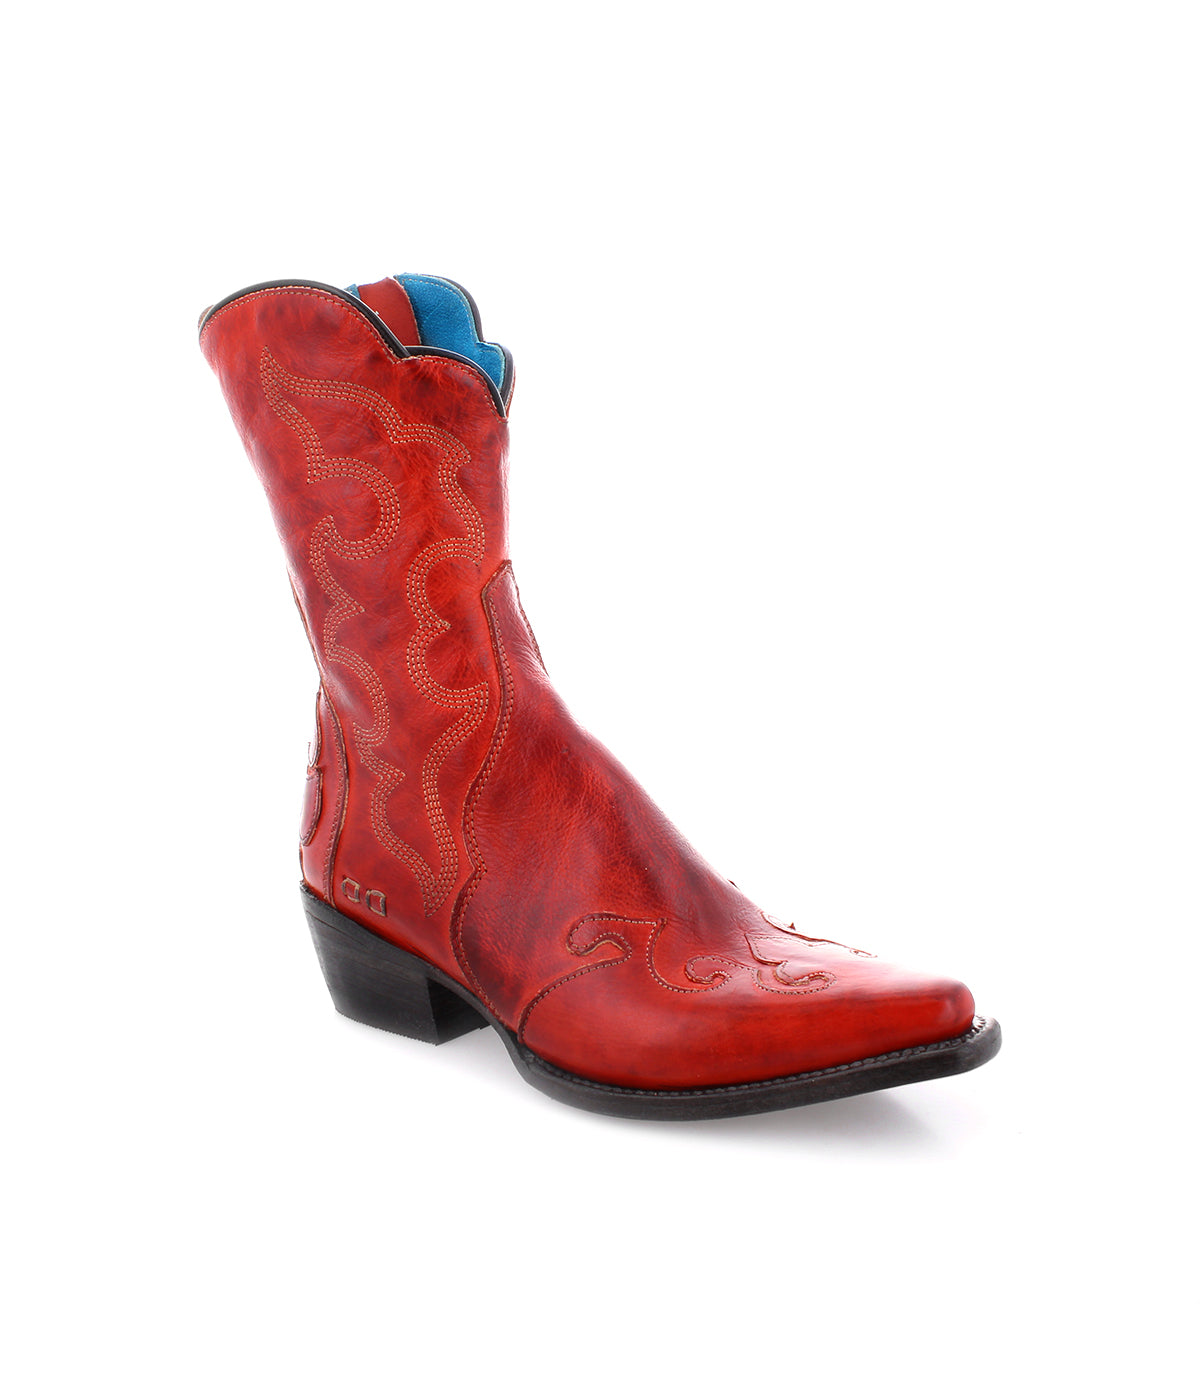 A women's Deuce cowboy boot with rustic charm on a white background, made by Bed Stu.